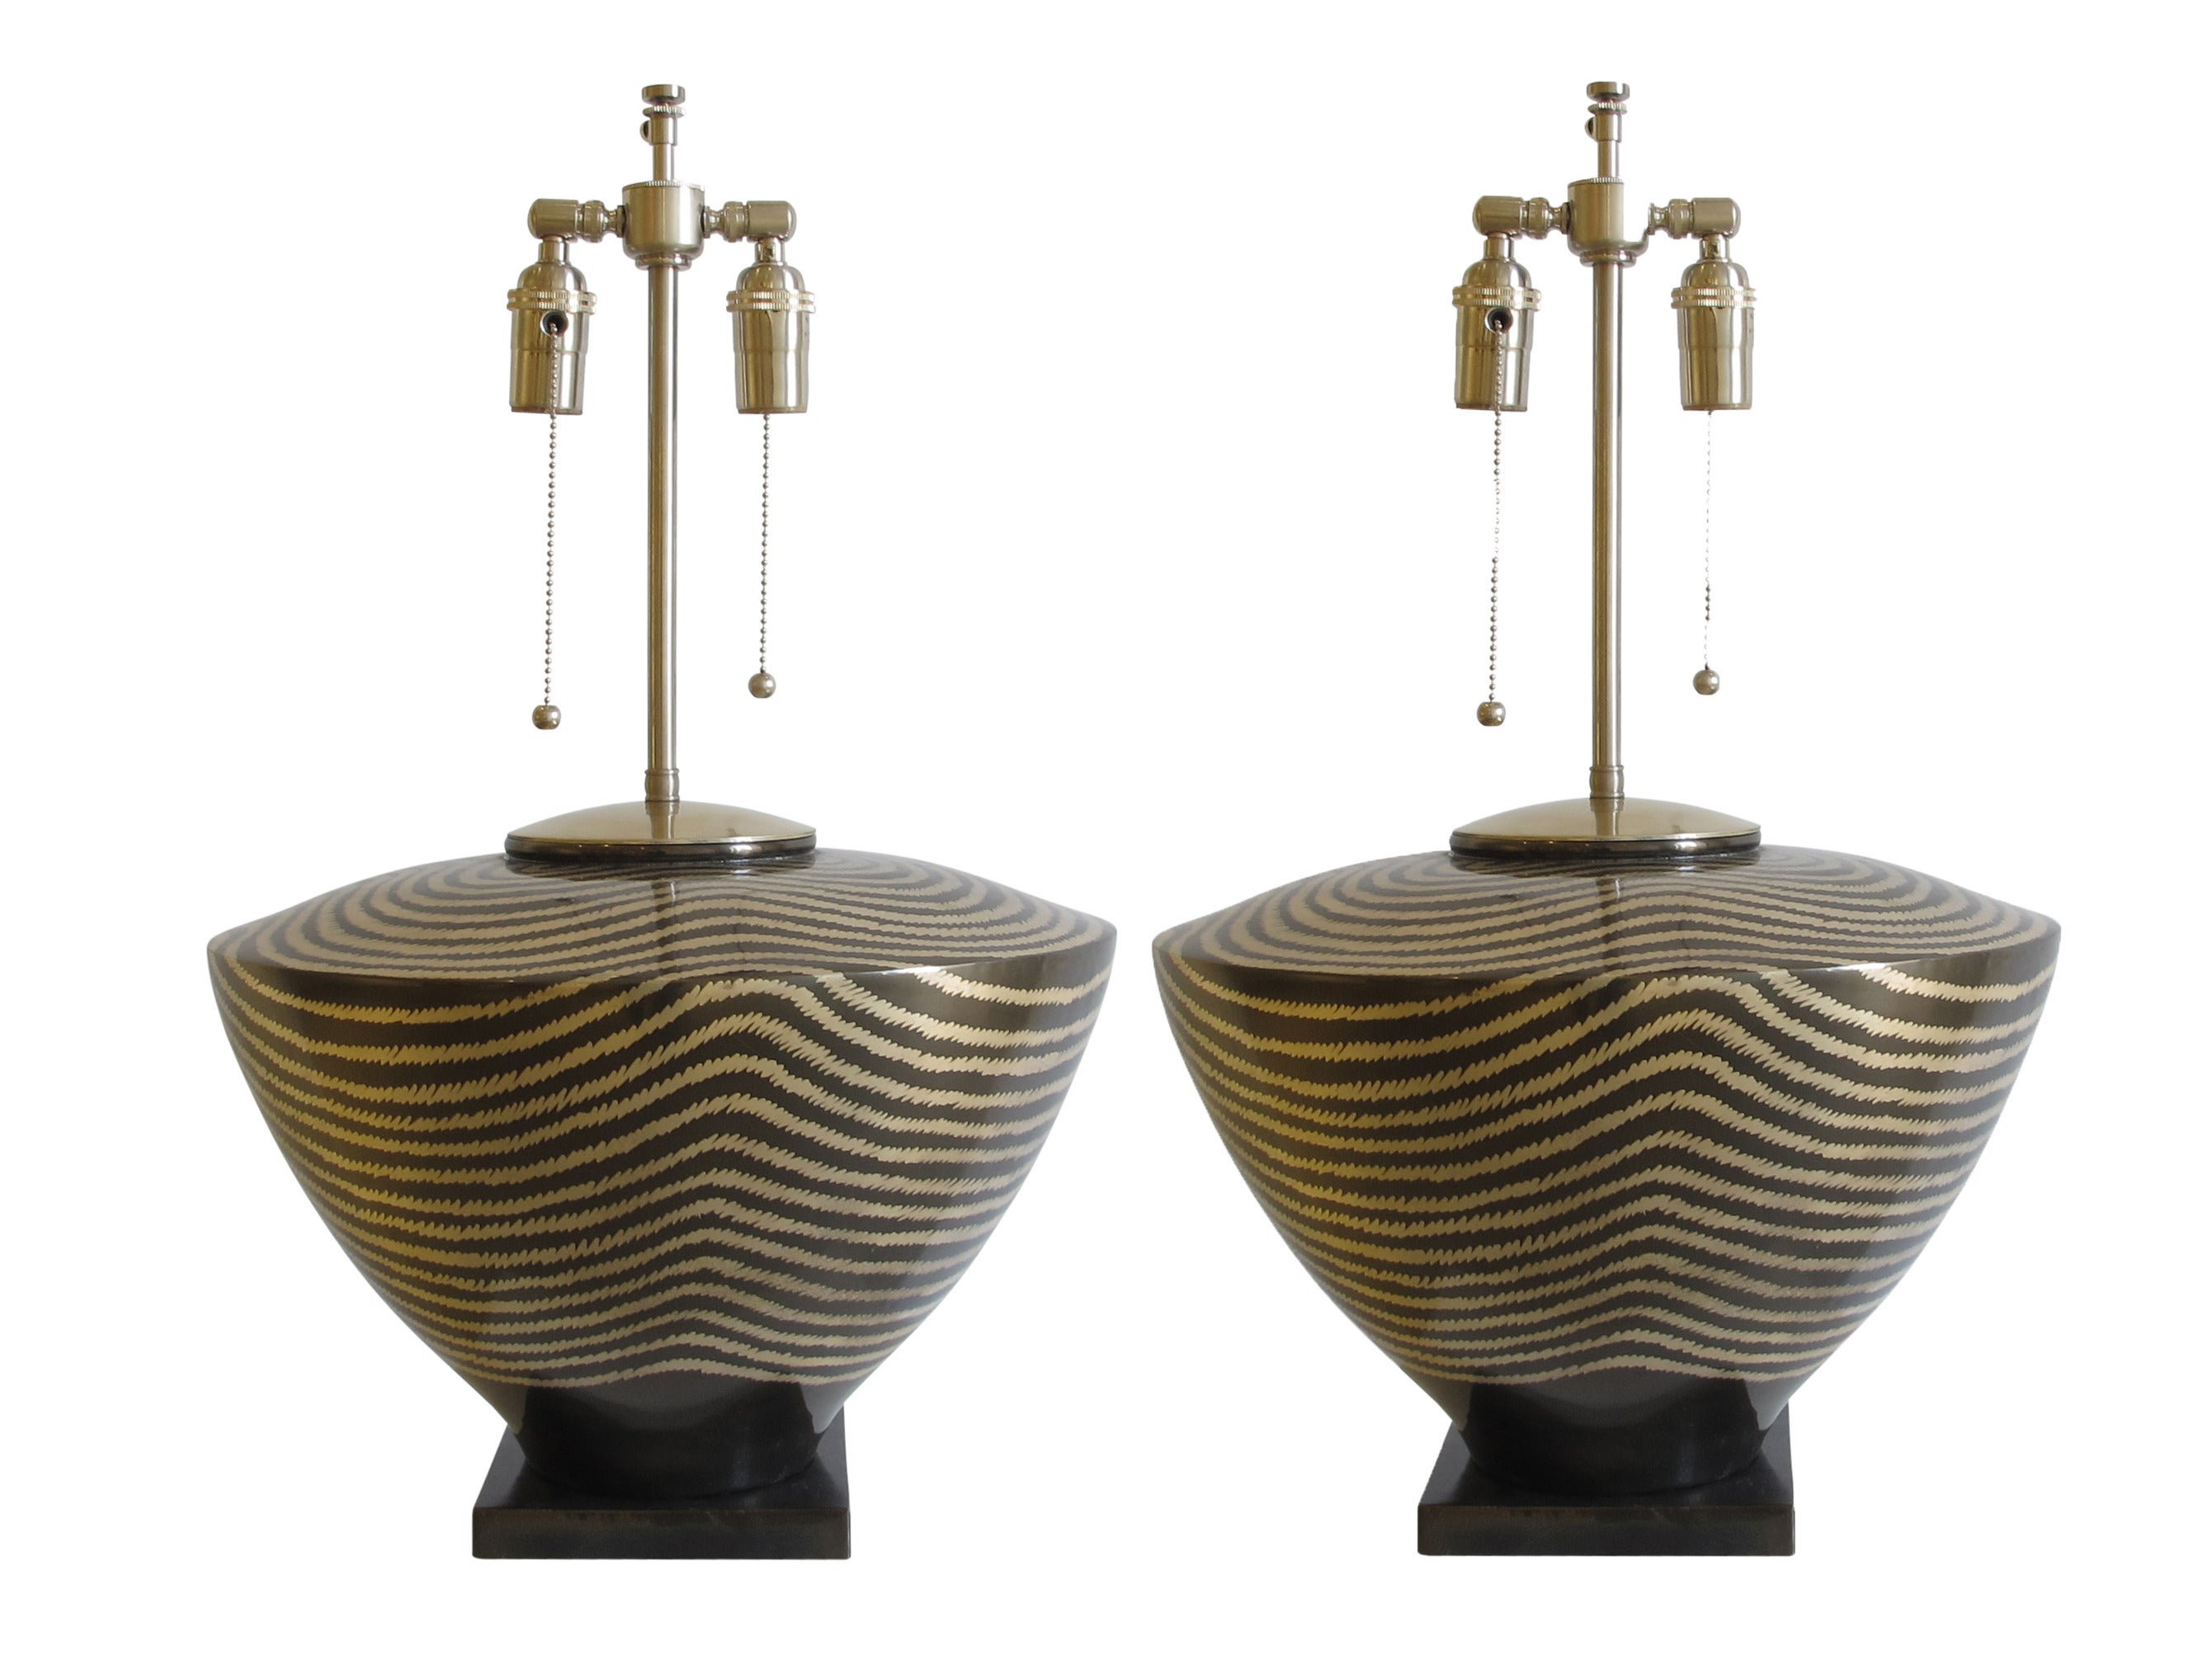 Pair of Monochromatic Patterned Brass Lamps by Jay Spectre for Paul Hanson